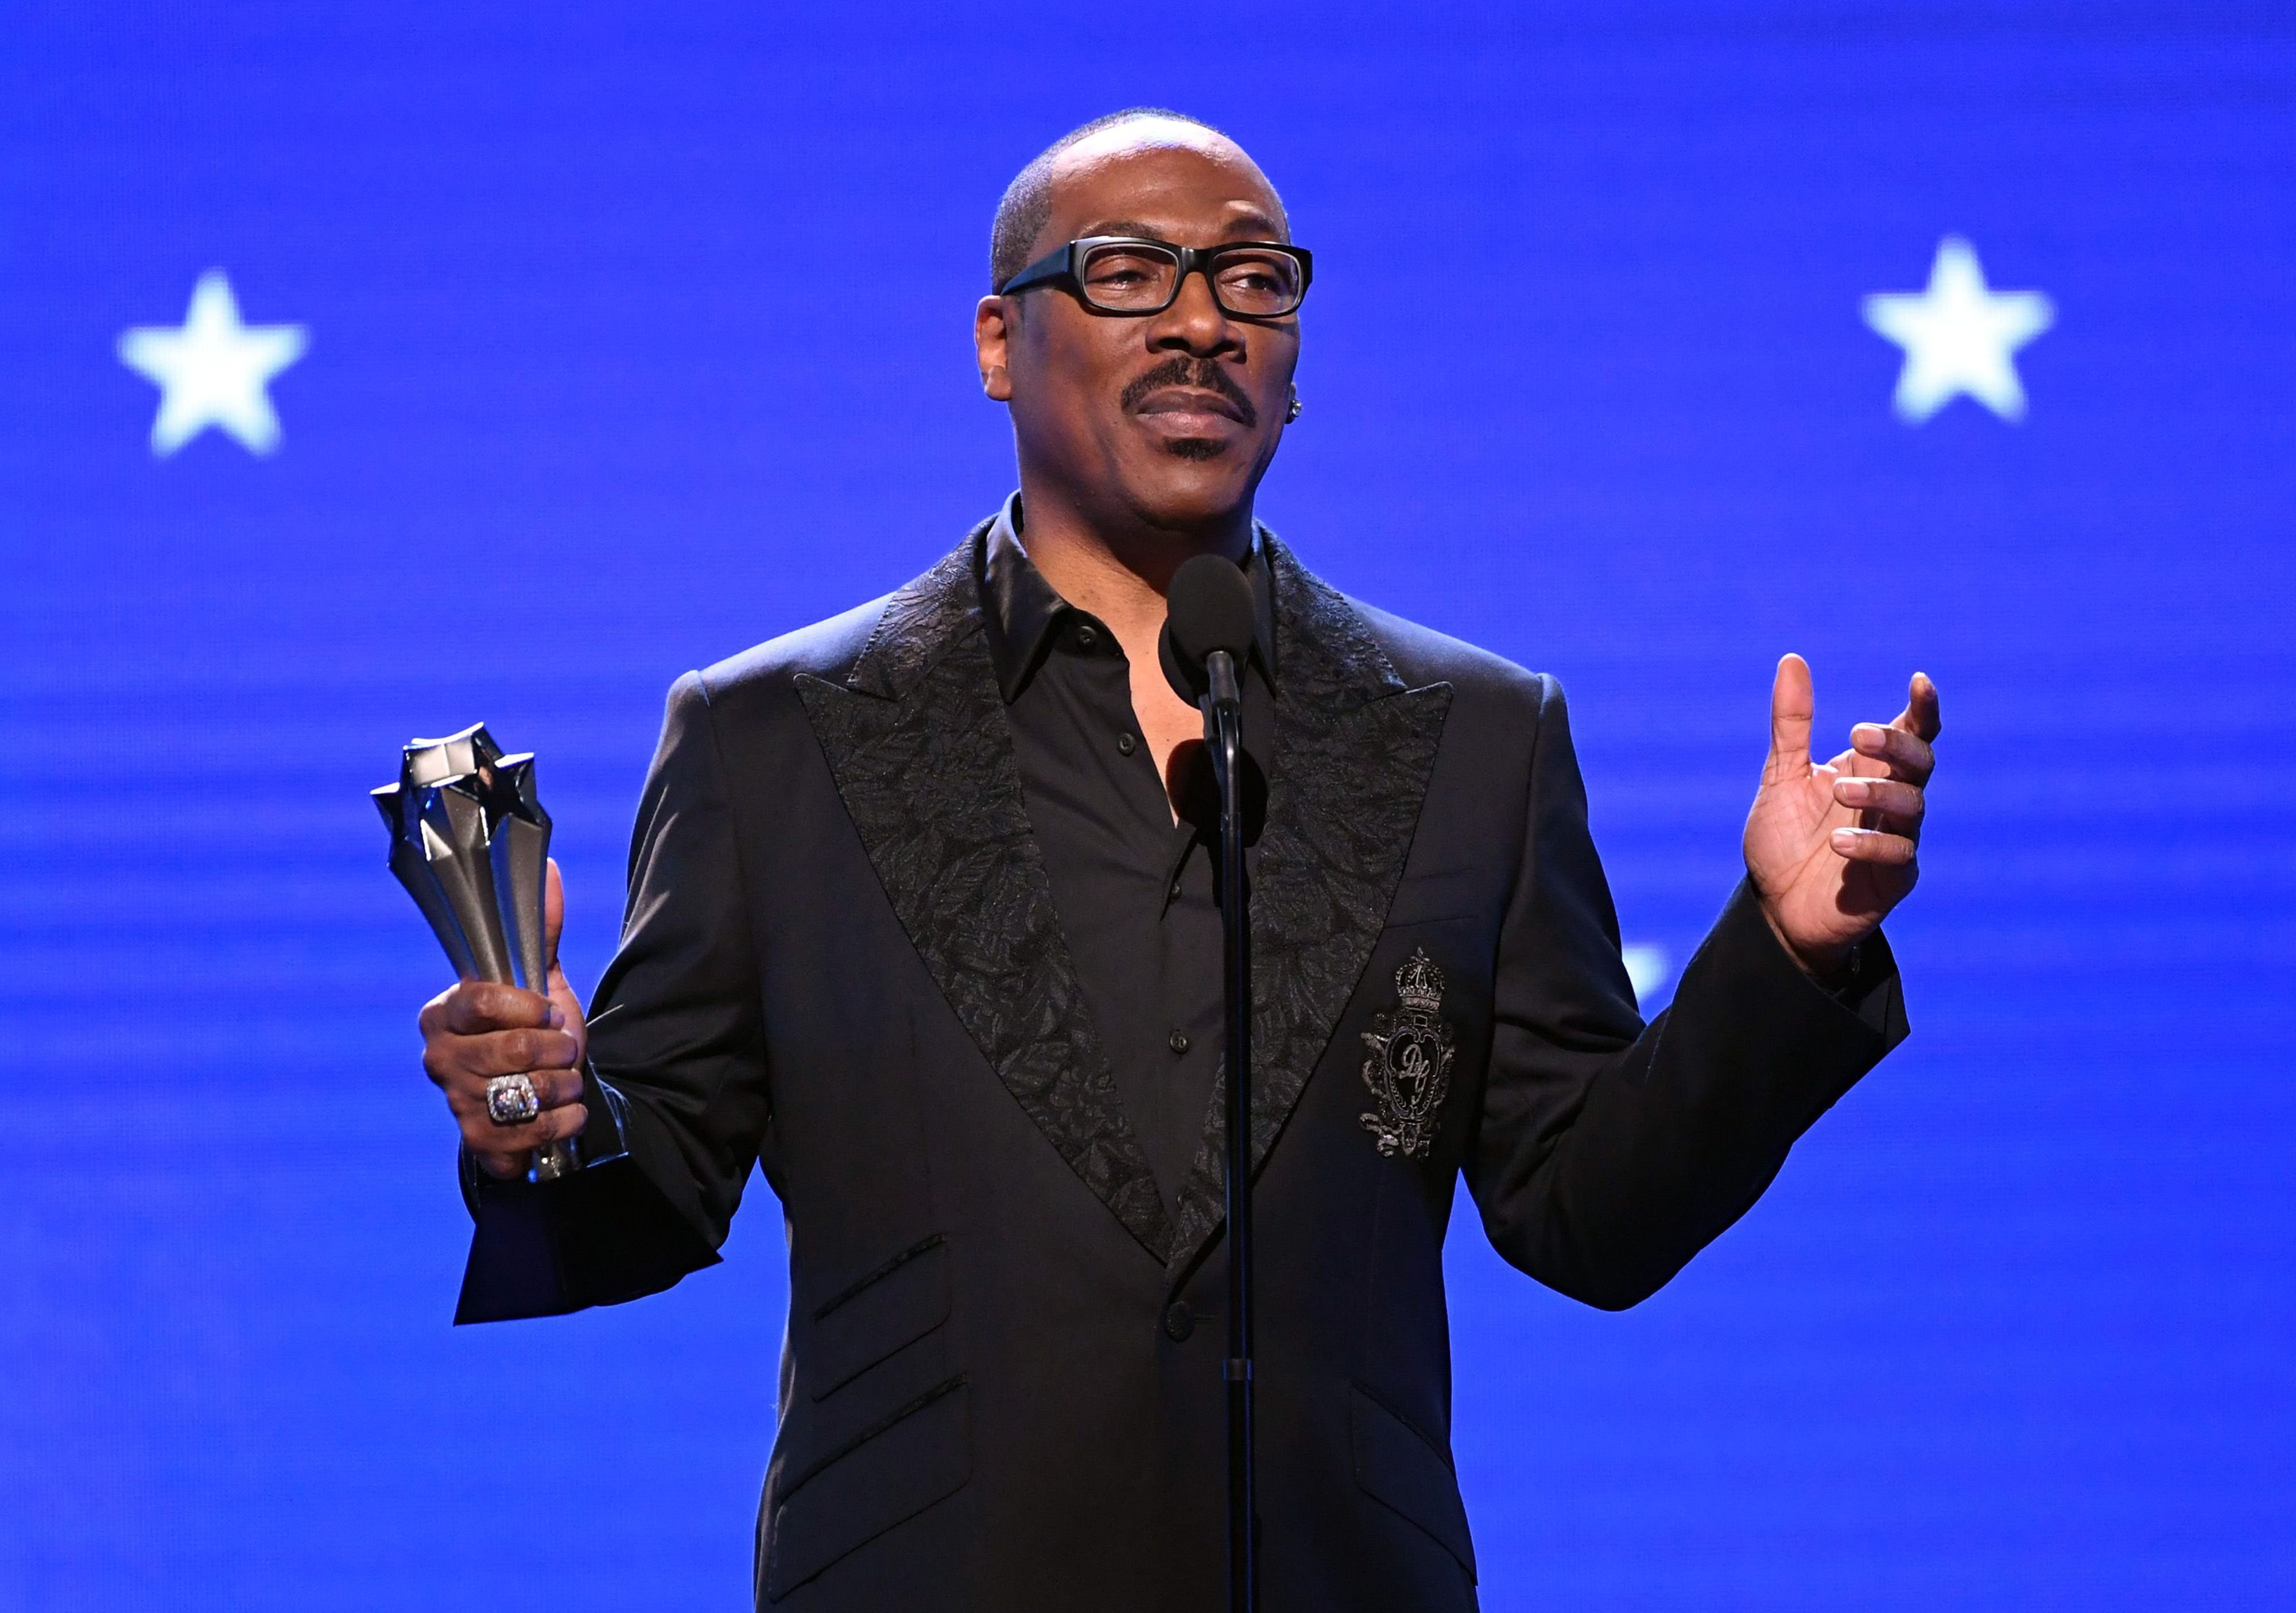 Eddie Murphy during the 25th Annual Critics' Choice Awards at Barker Hangar on January 12, 2020 in Santa Monica, California. | Source: Getty Images